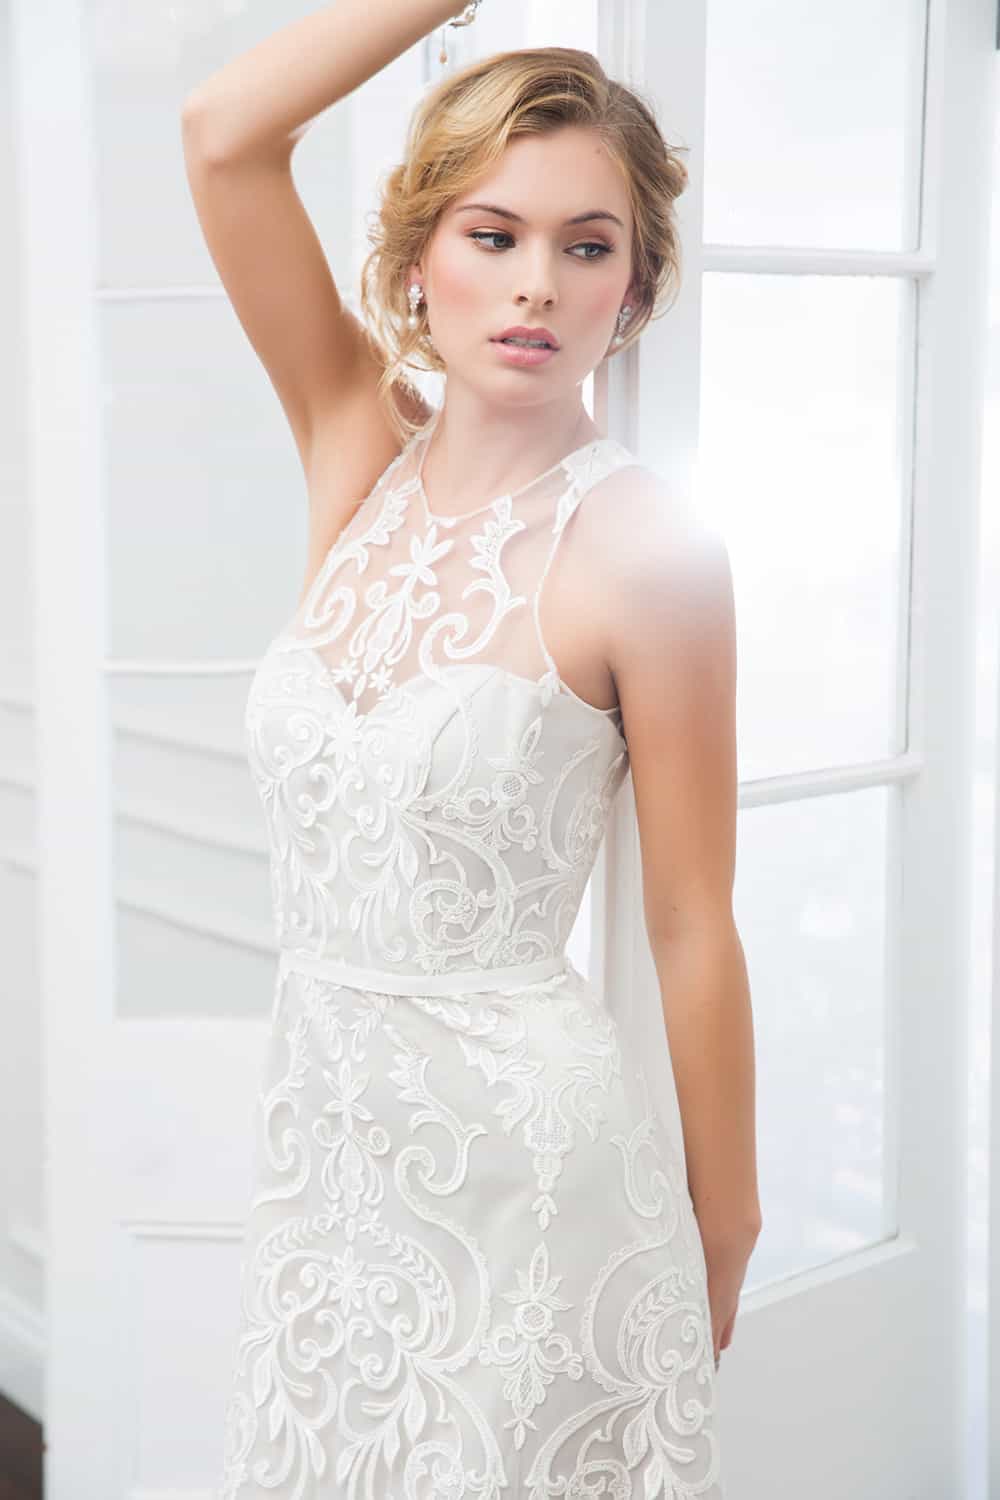 The Shani wedding gown from Wendy Makin's Couture collection